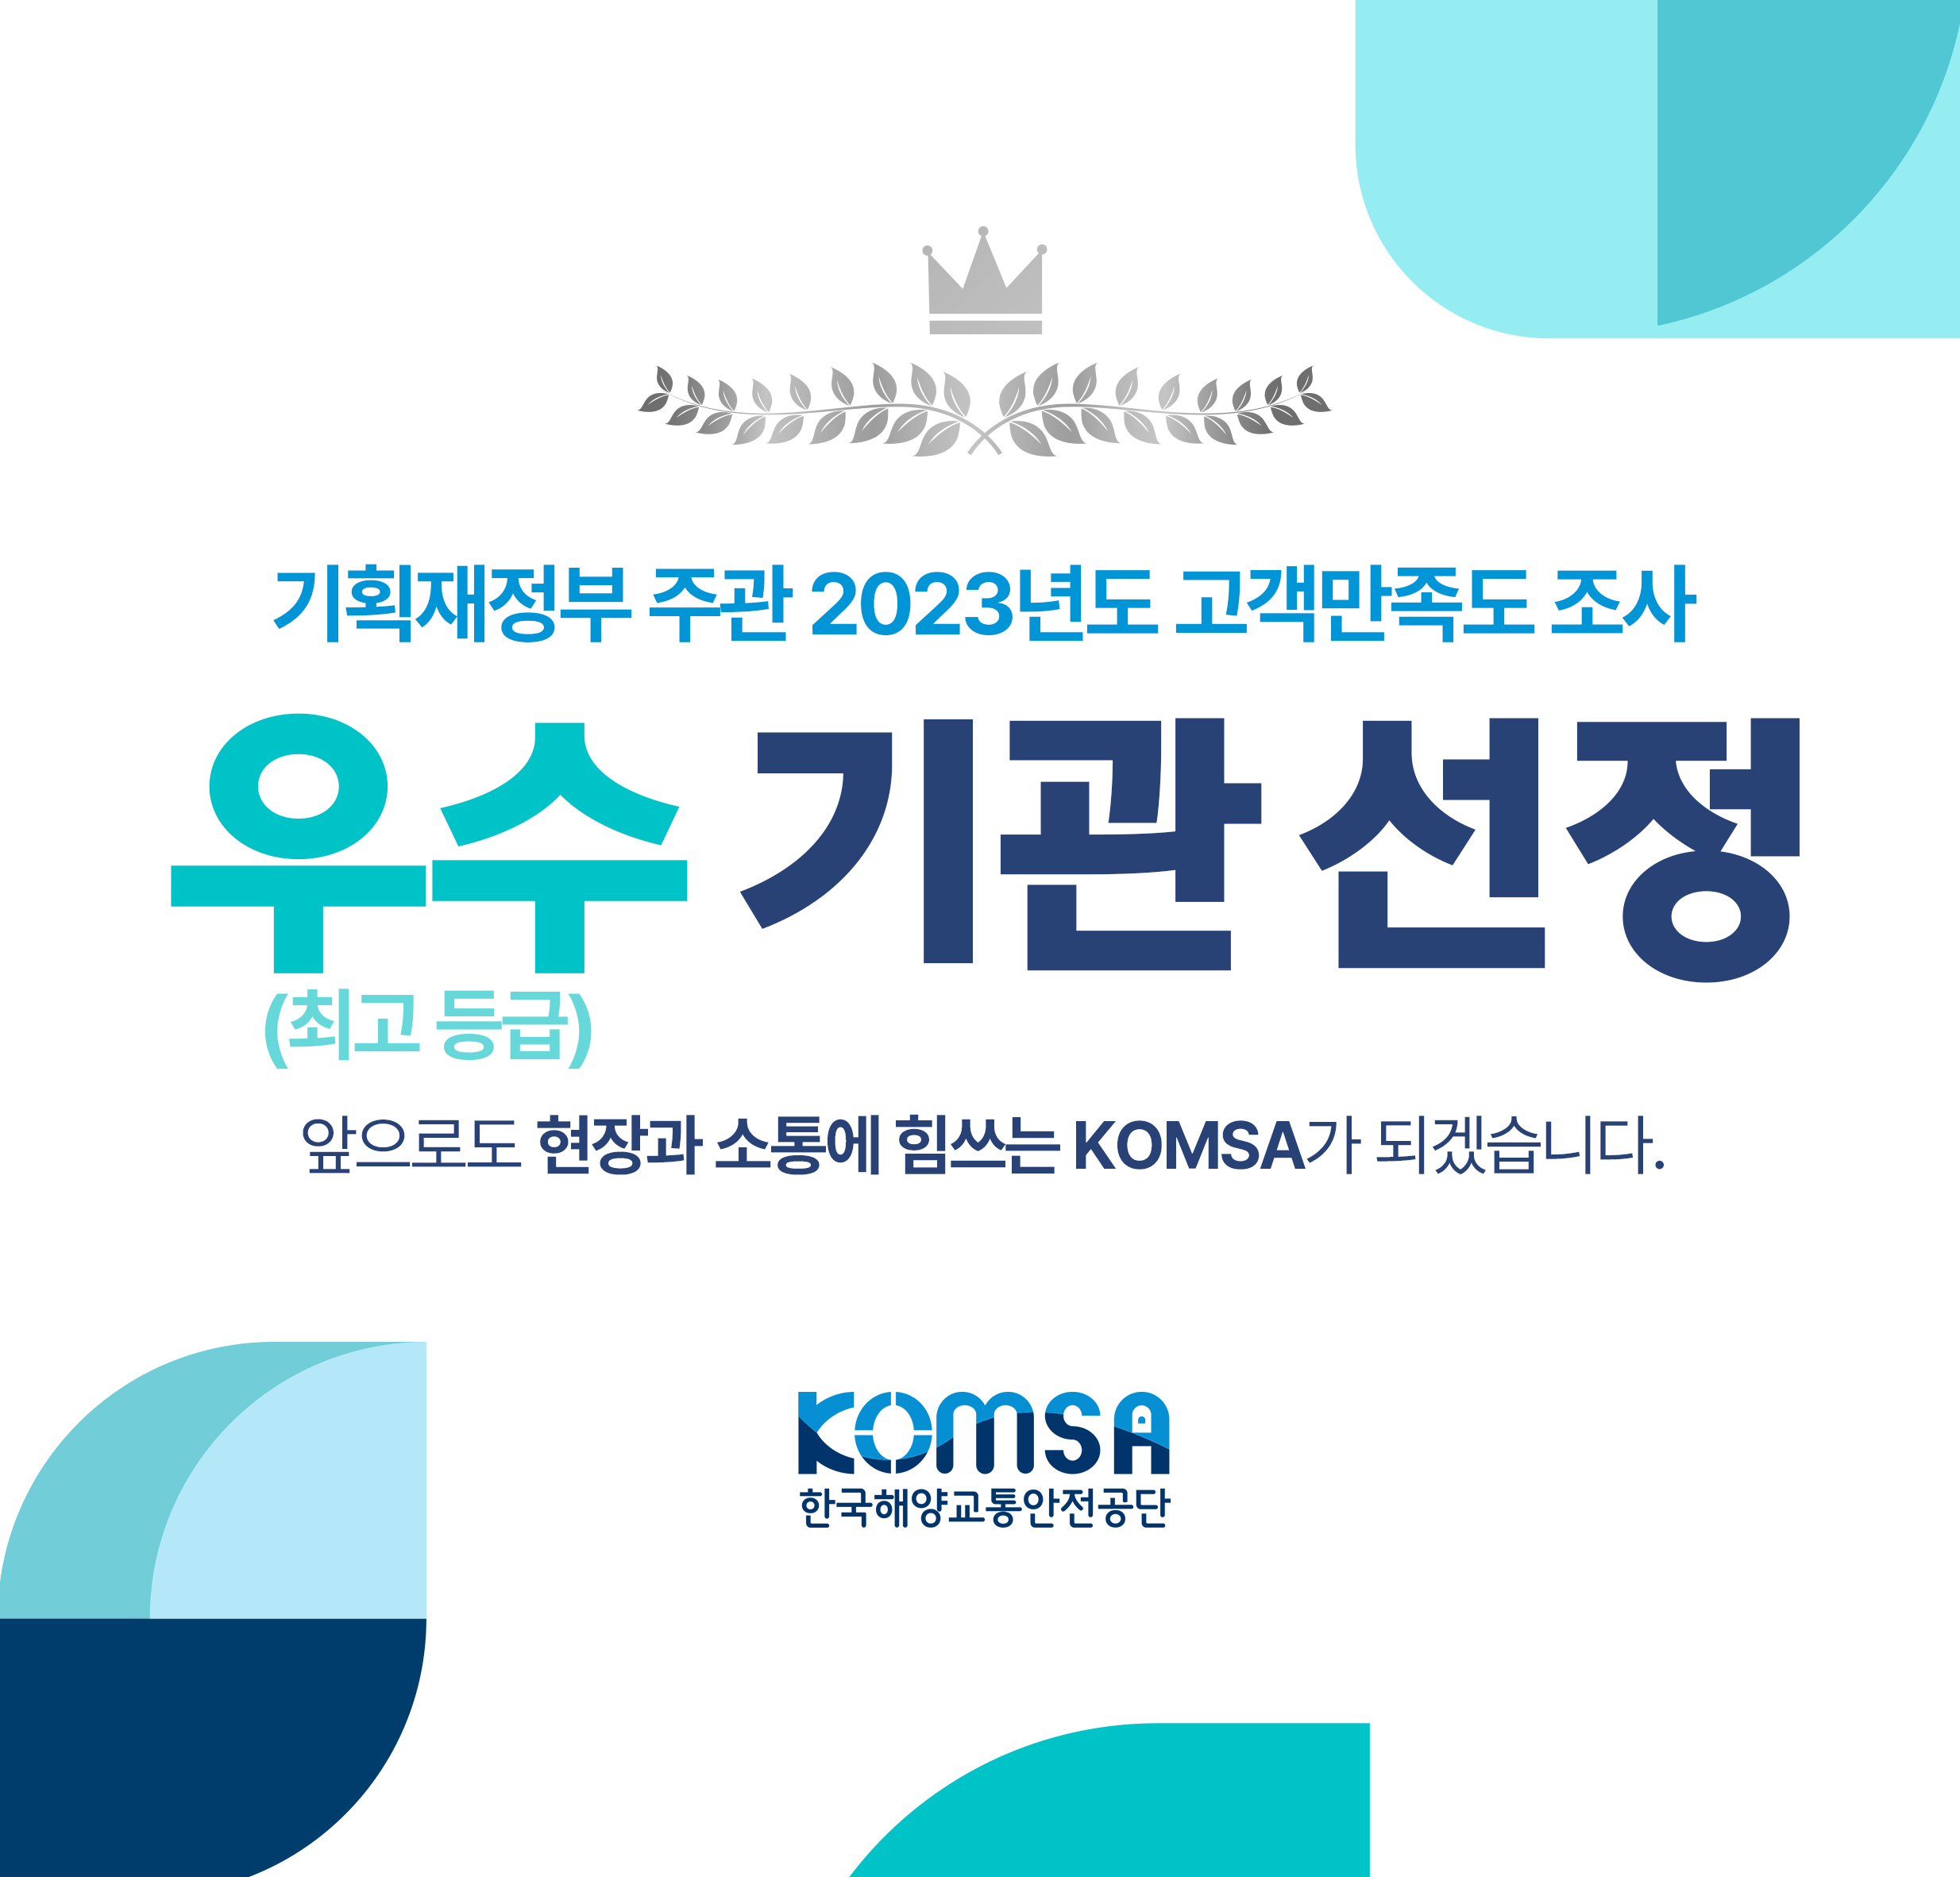 https://www.komsa.or.kr/kor/;jsessionid=4536106D7AA61AA68ACDC0ABA4234945